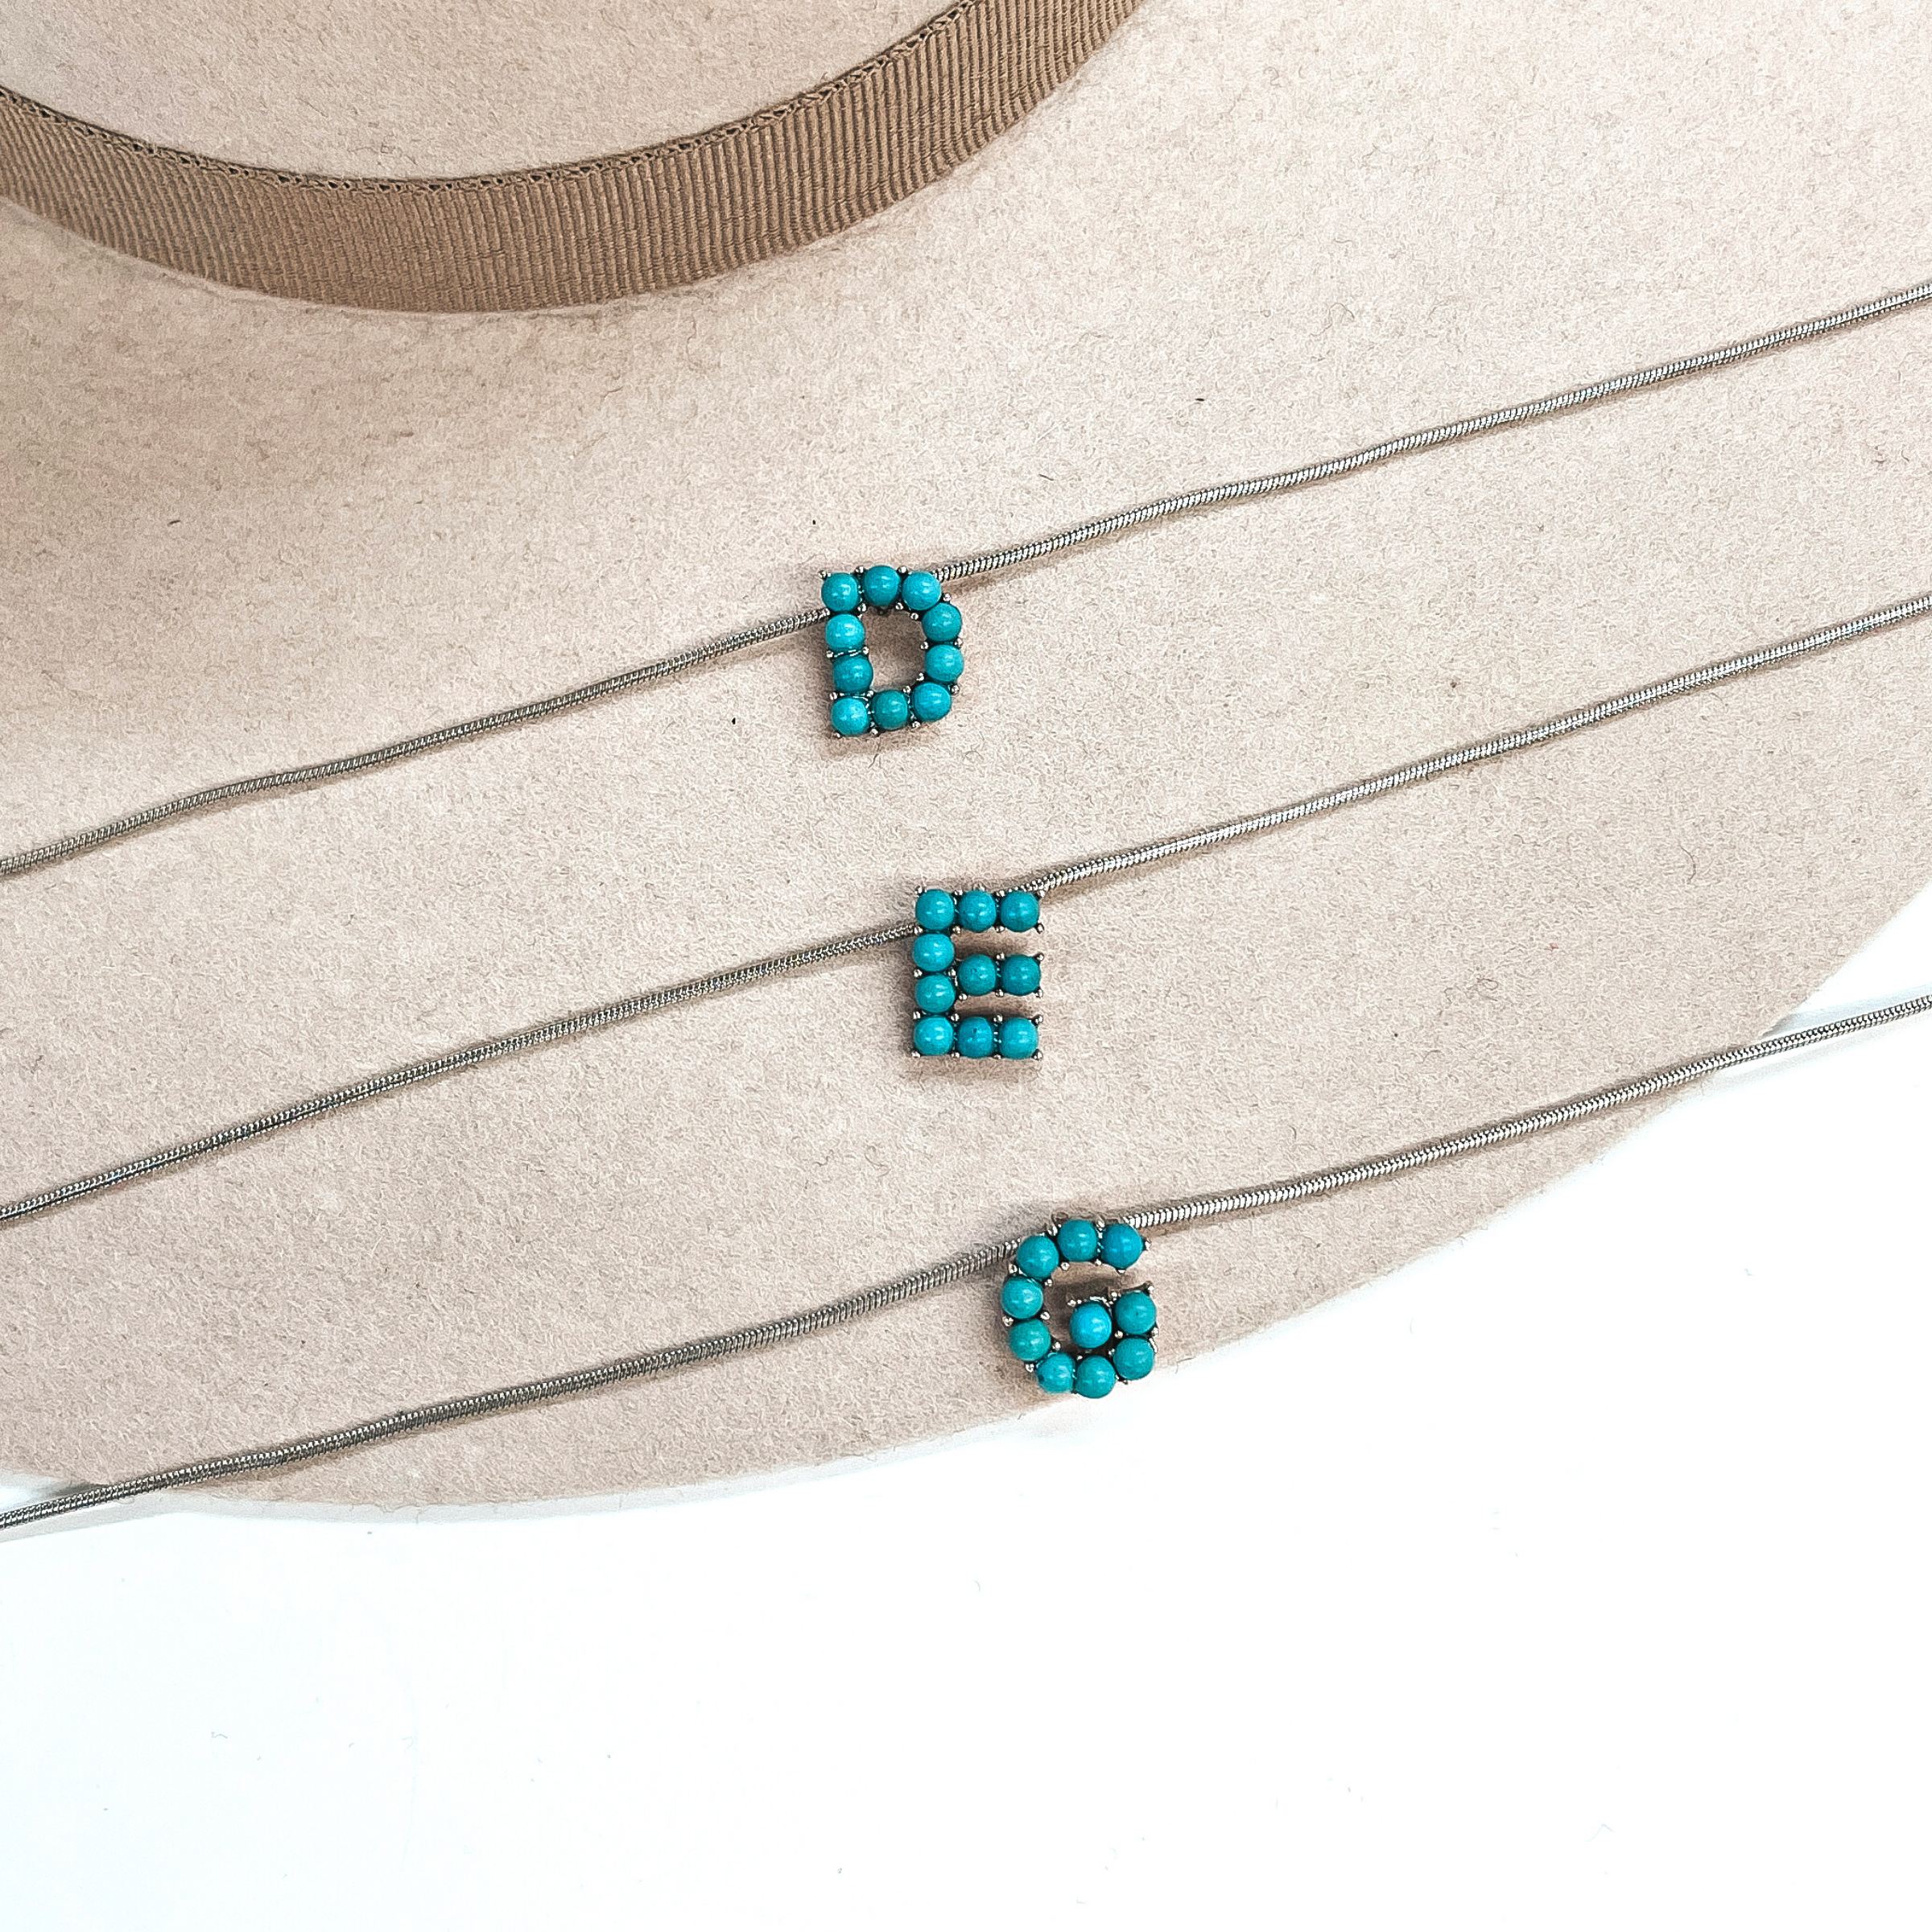 These are three turquoise stone initial necklaces with a thin, silver  snake chain. From top to bottom; D, E, G. These necklaces are taken  laying on a beige felt hat and on a white background.